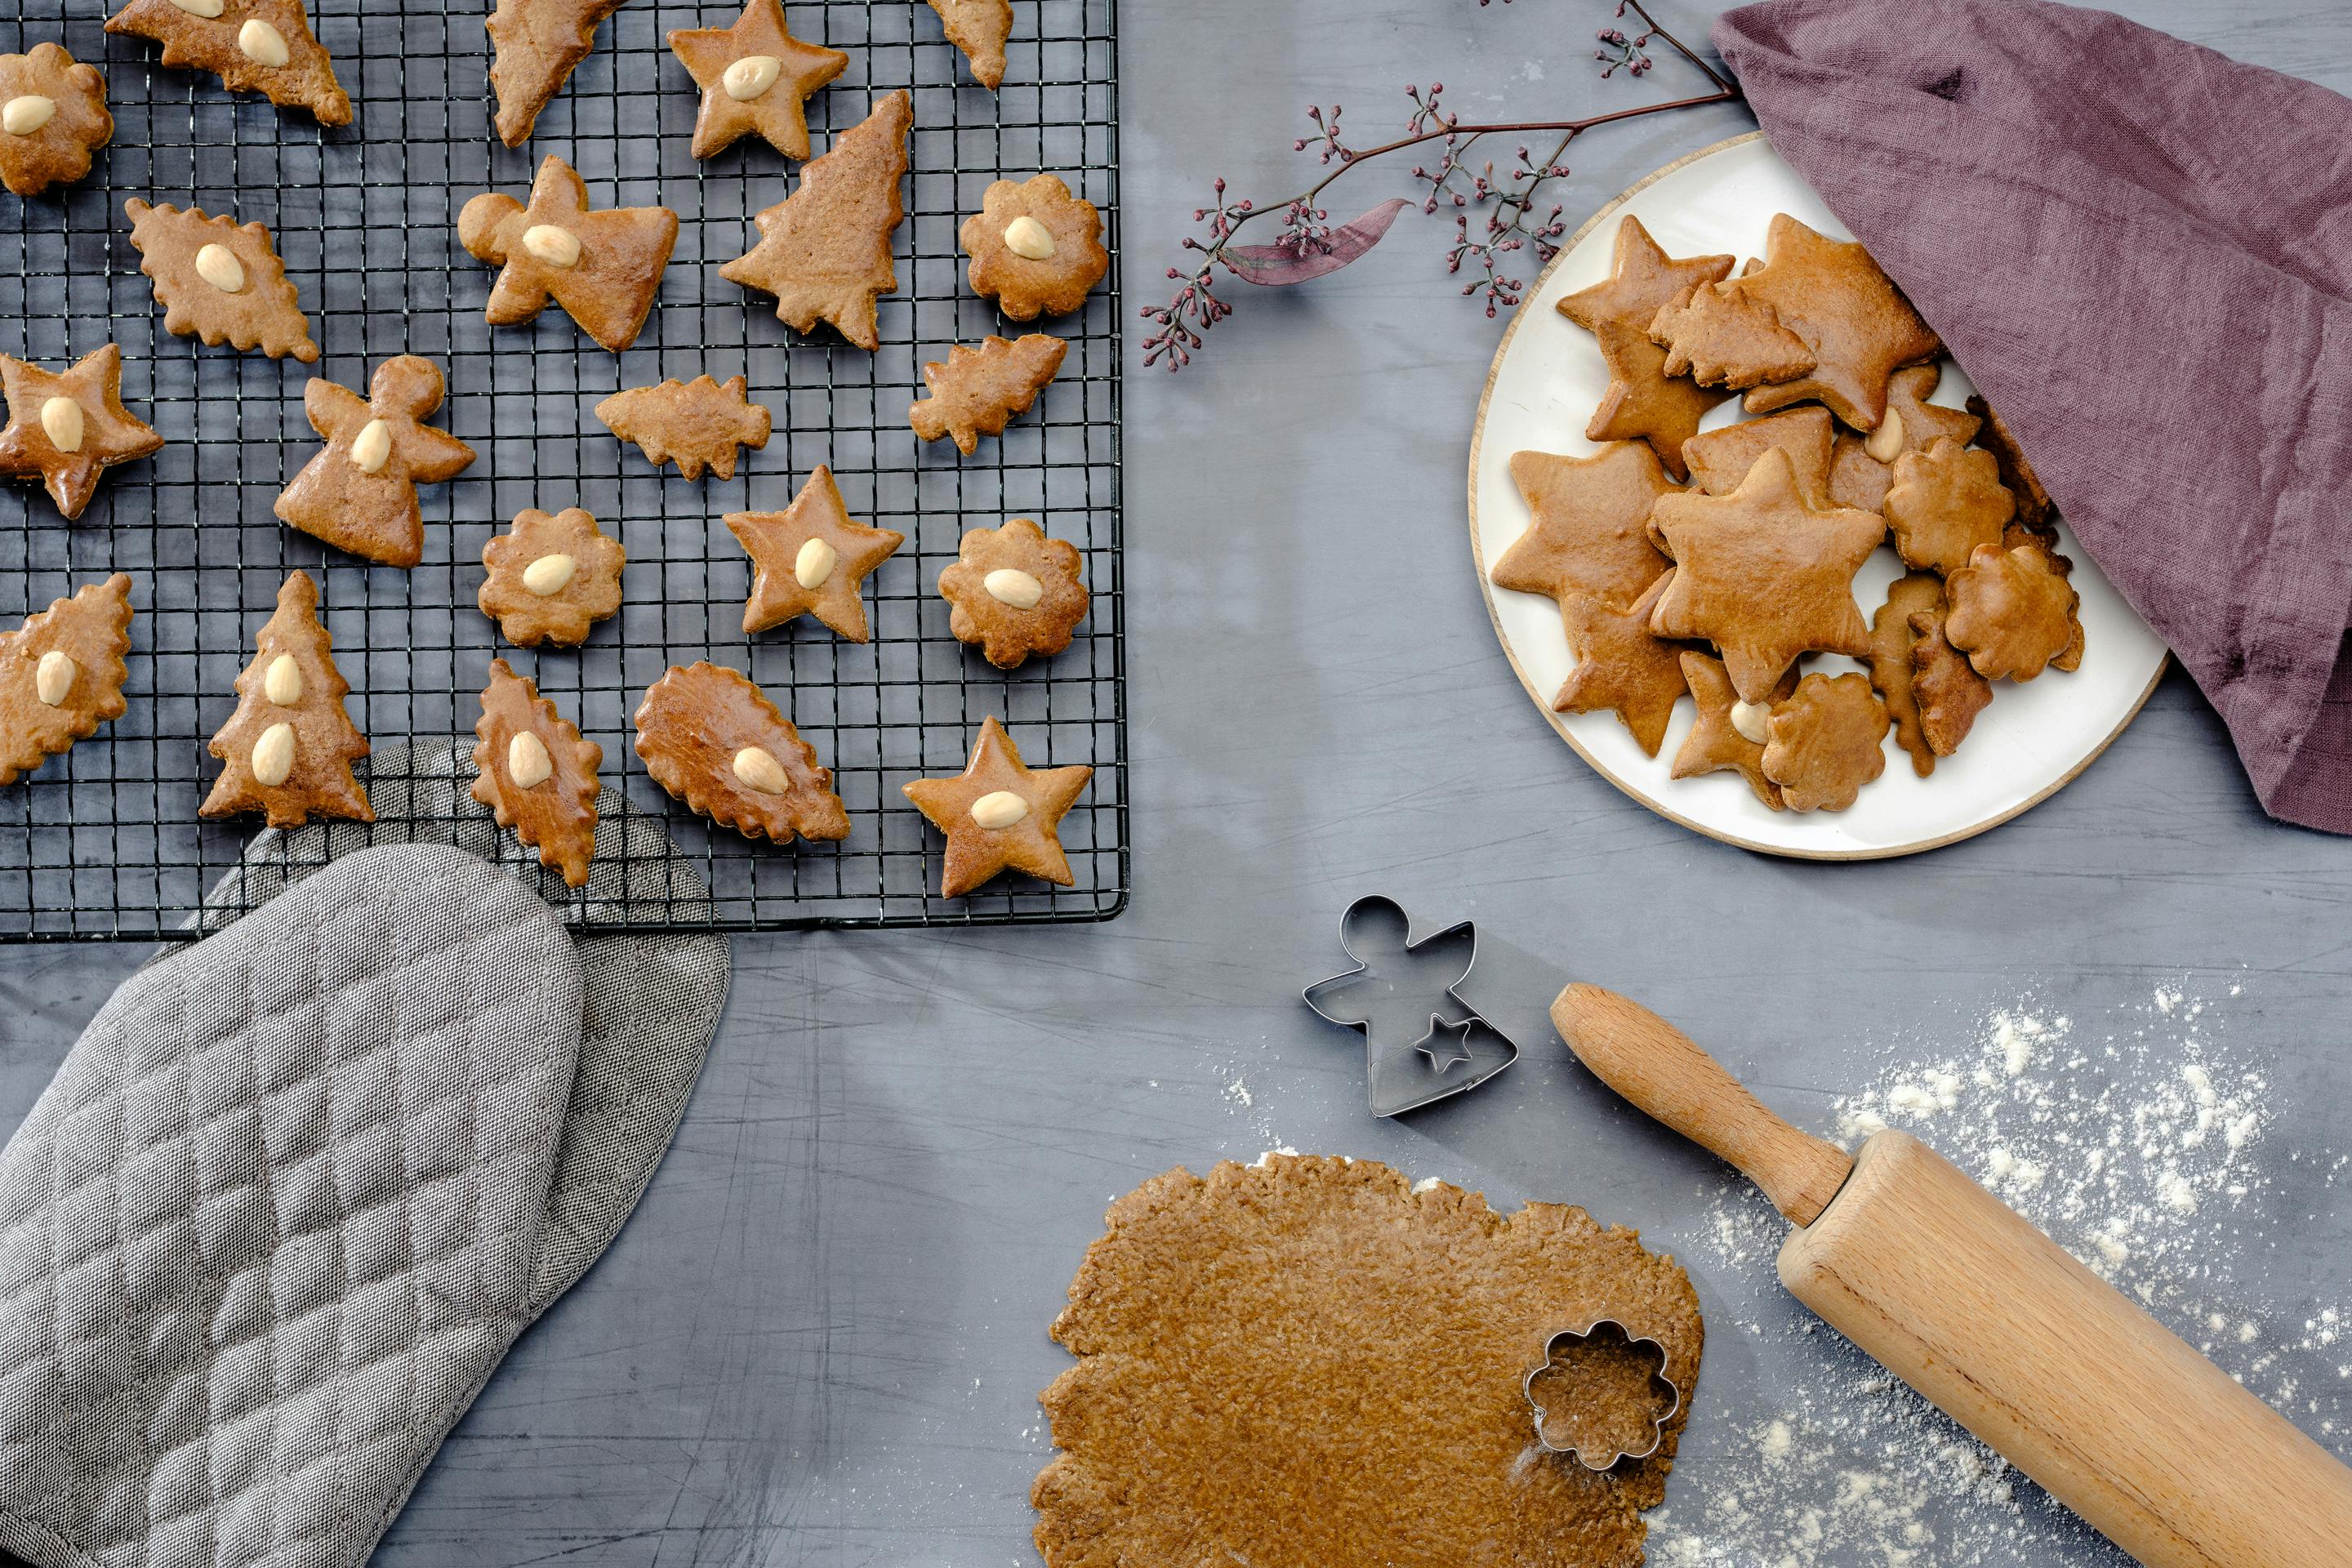 Honey gingerbreads are being cut out of dough and lie on a black wire rack to cool down